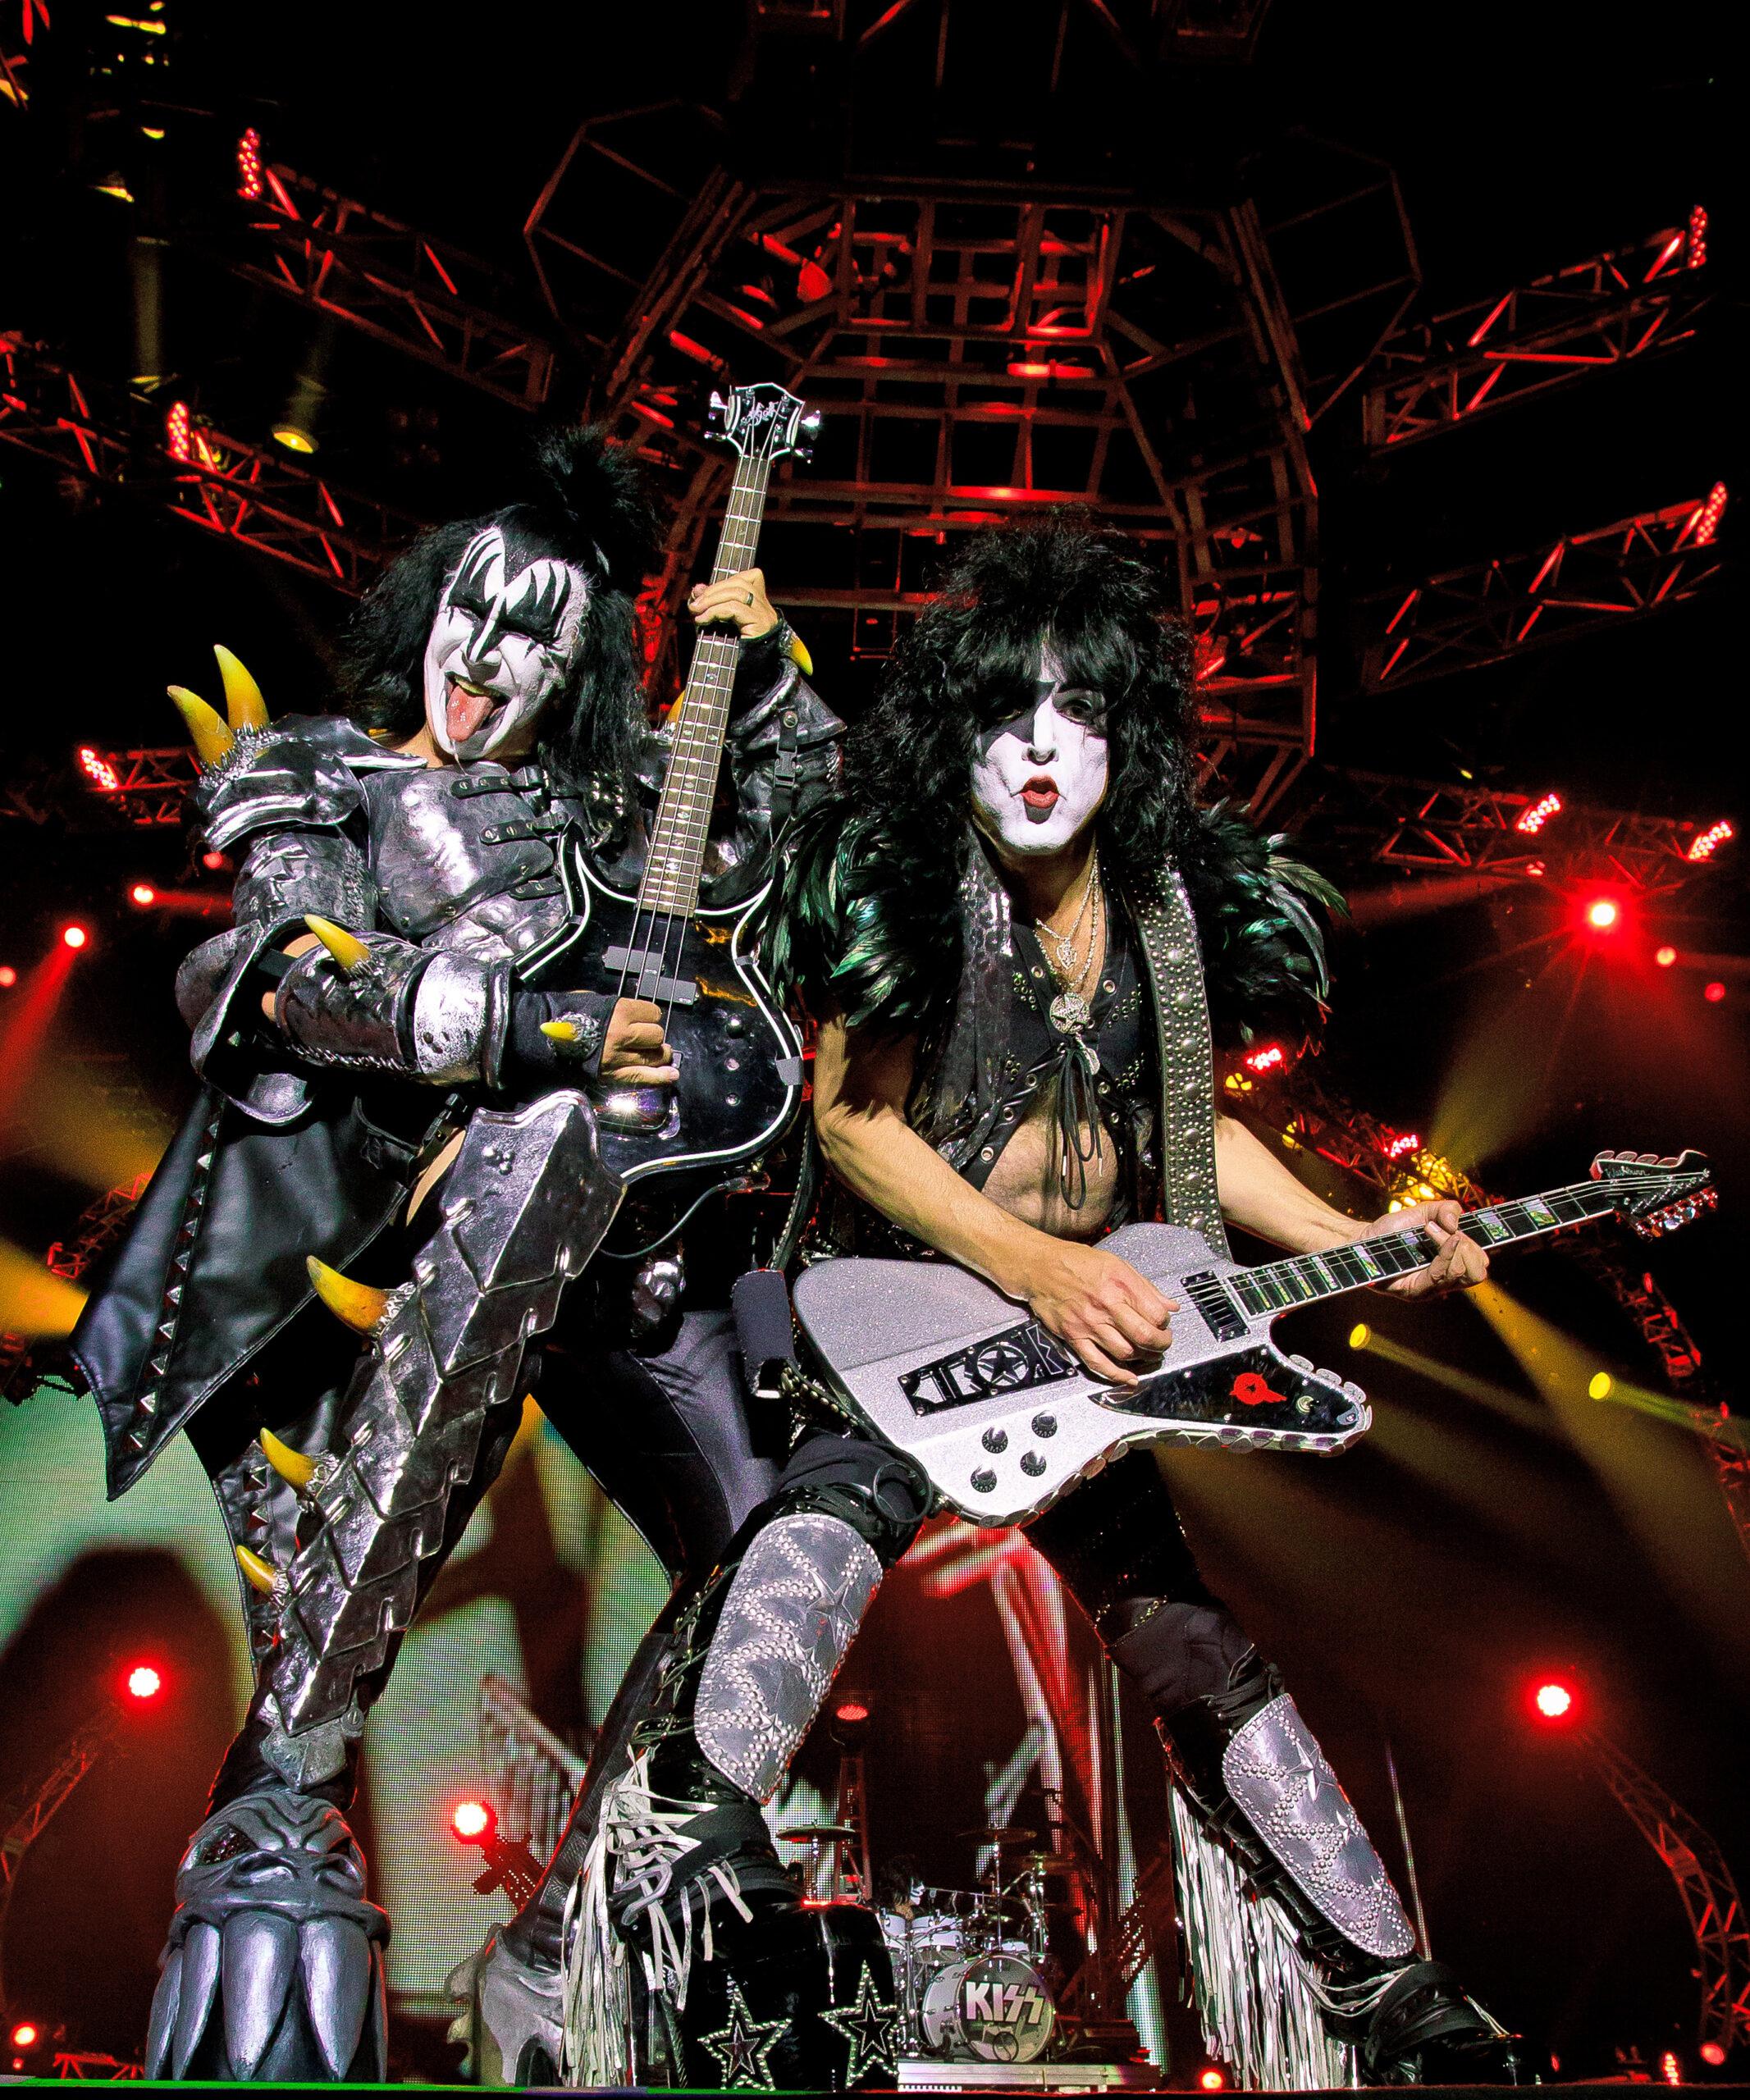 Gene Simmons Tests Positive For COVID-19, Band Postpones Tour!